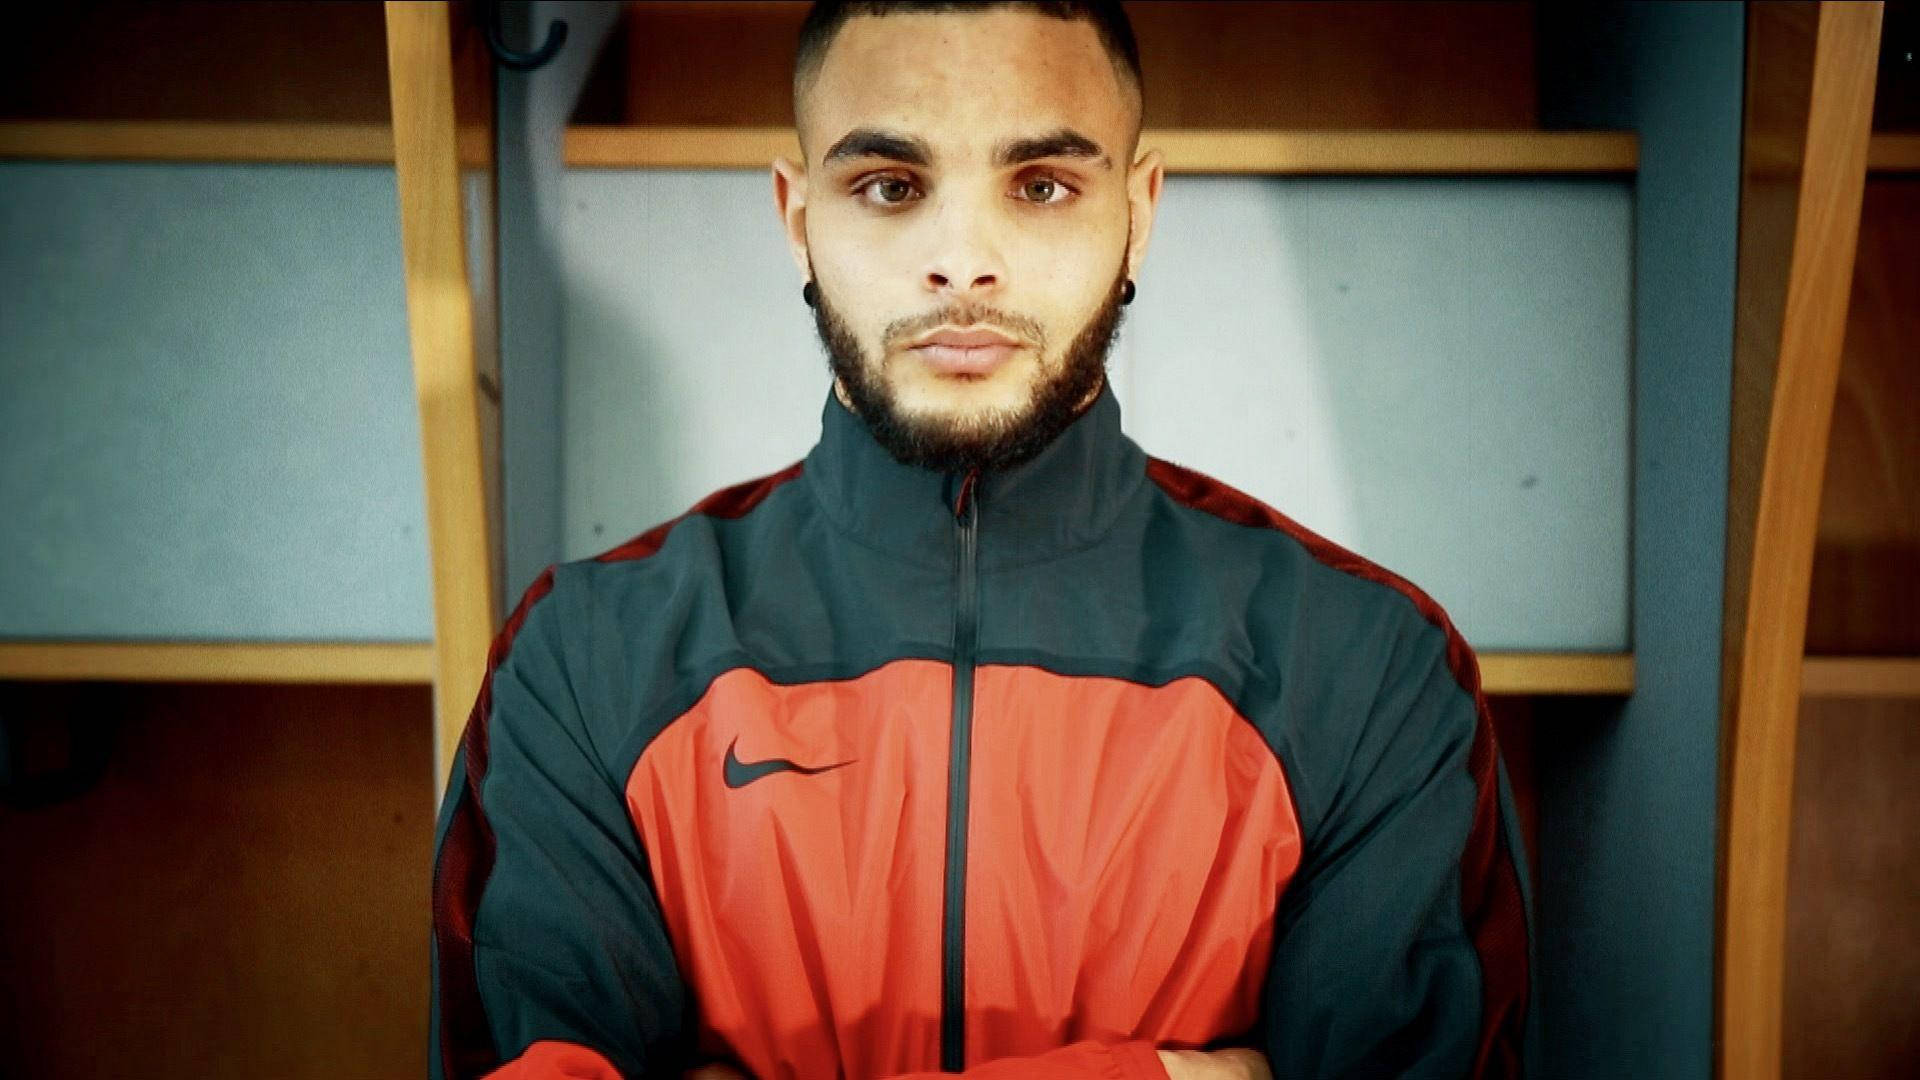 Layvinkurzawa Vignette Nike Is Already In Spanish. It Refers To A Specific Image Or Graphic Of Layvin Kurzawa, A Football Player, Wearing Nike Branded Clothing Or Gear. 